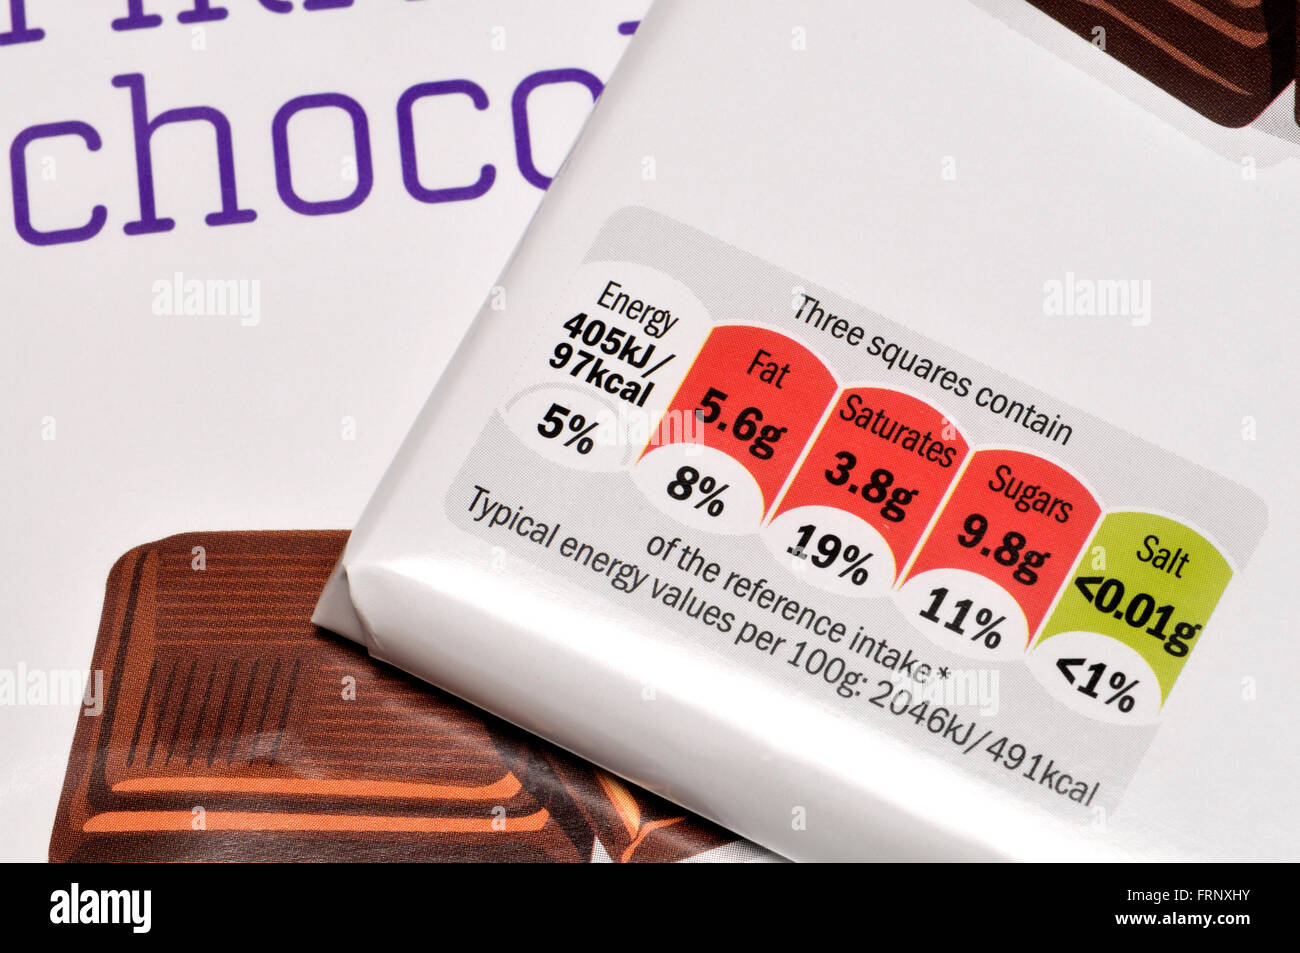 Chocolate bar wrappers showing nutritional information Stock Photo